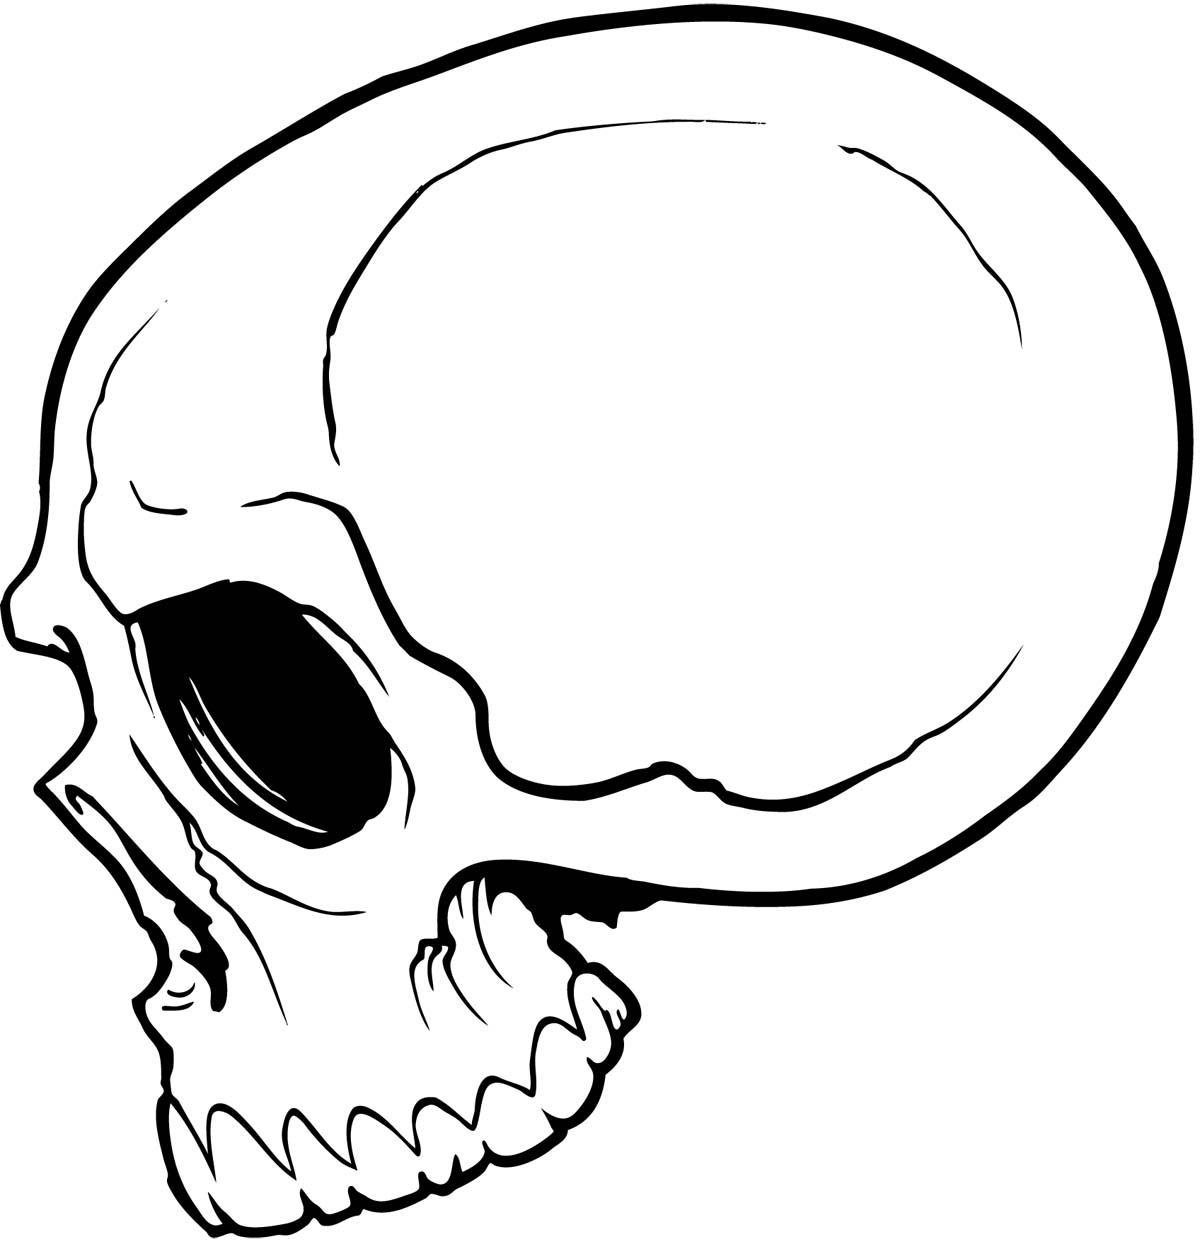 Simple Skull Drawing - Clipart library